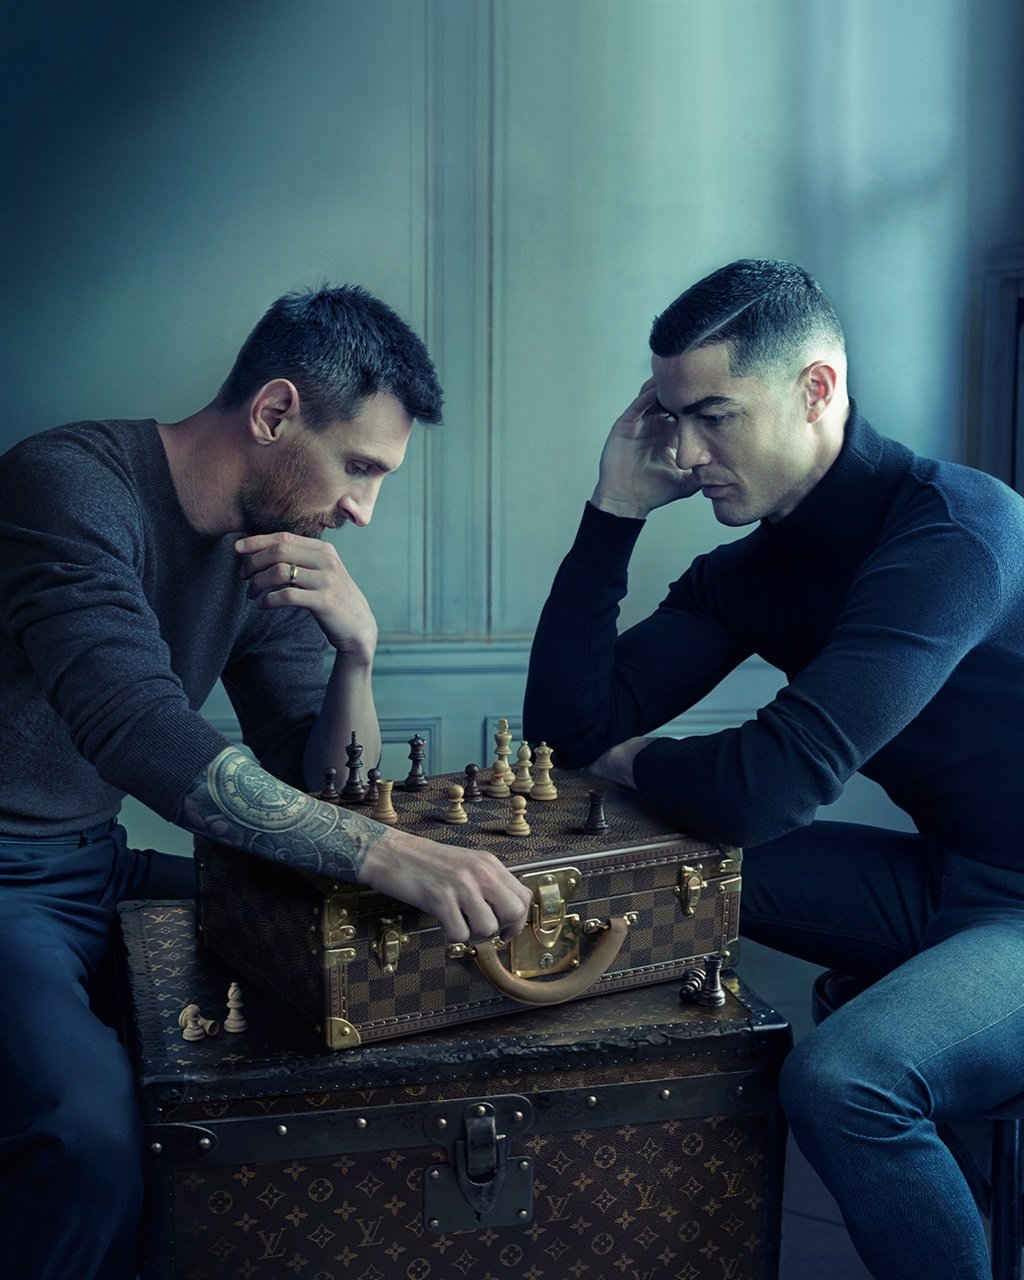 Leo Messi and Ronaldo Louis Vuitton photoshoot behind the scenes